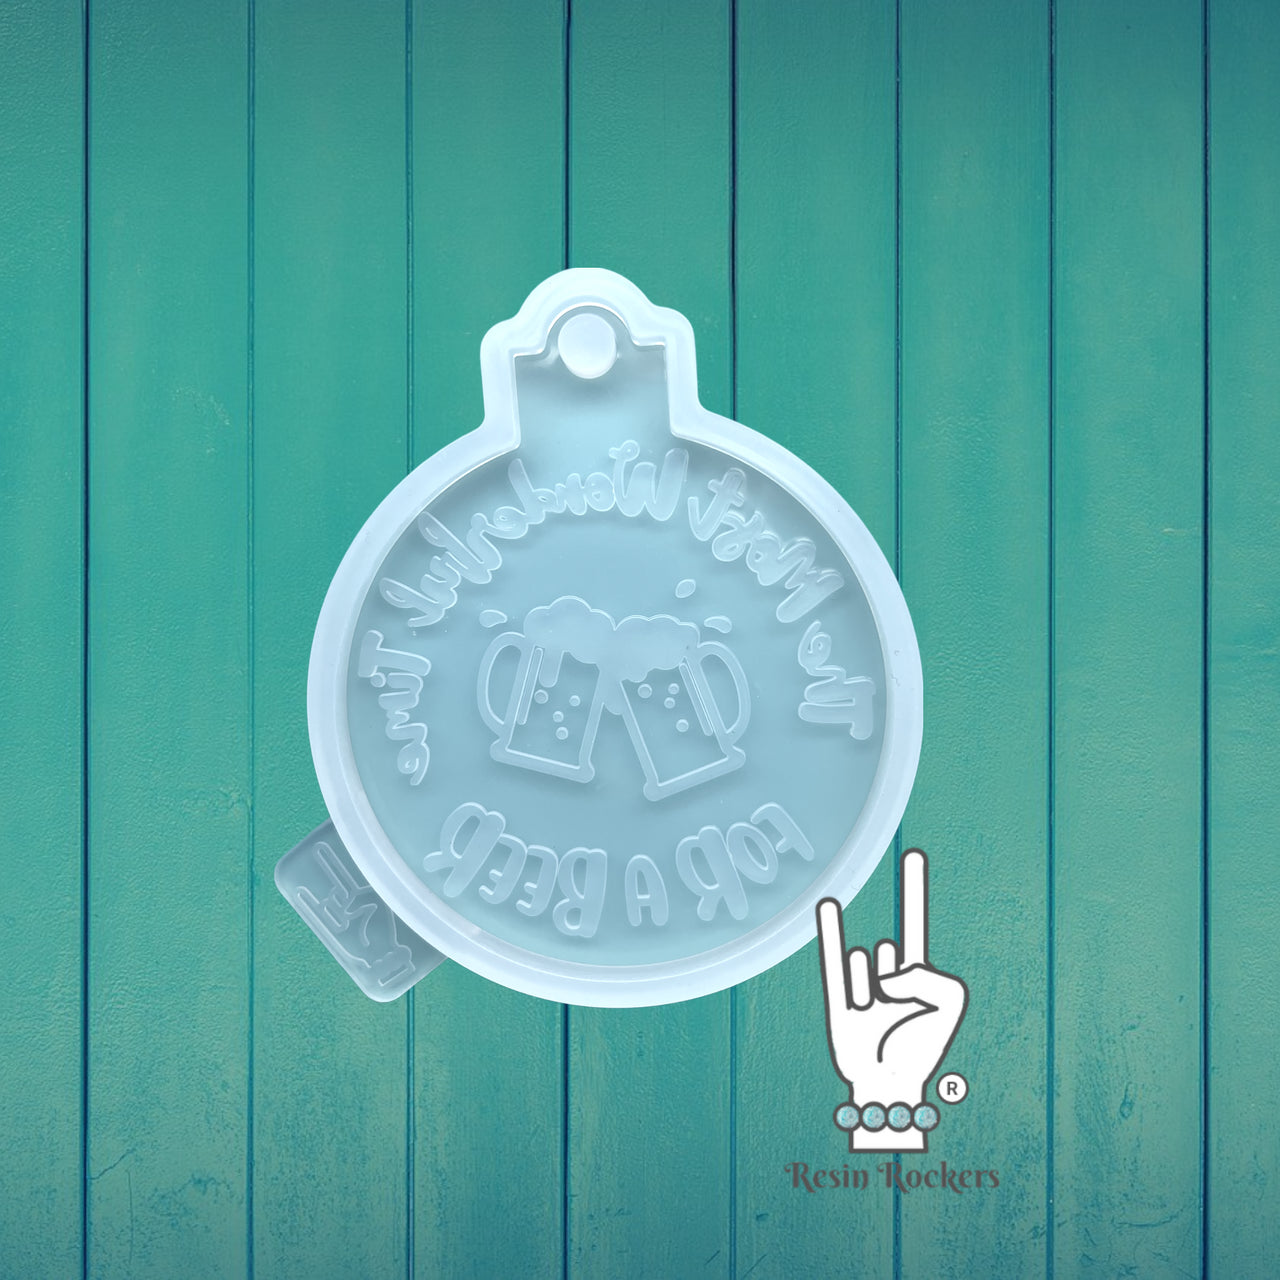 UV Safe The Most Wonderful Time For a Beer Resin Rockers Exclusive Ornament Mold for UV and Epoxy Resin Art